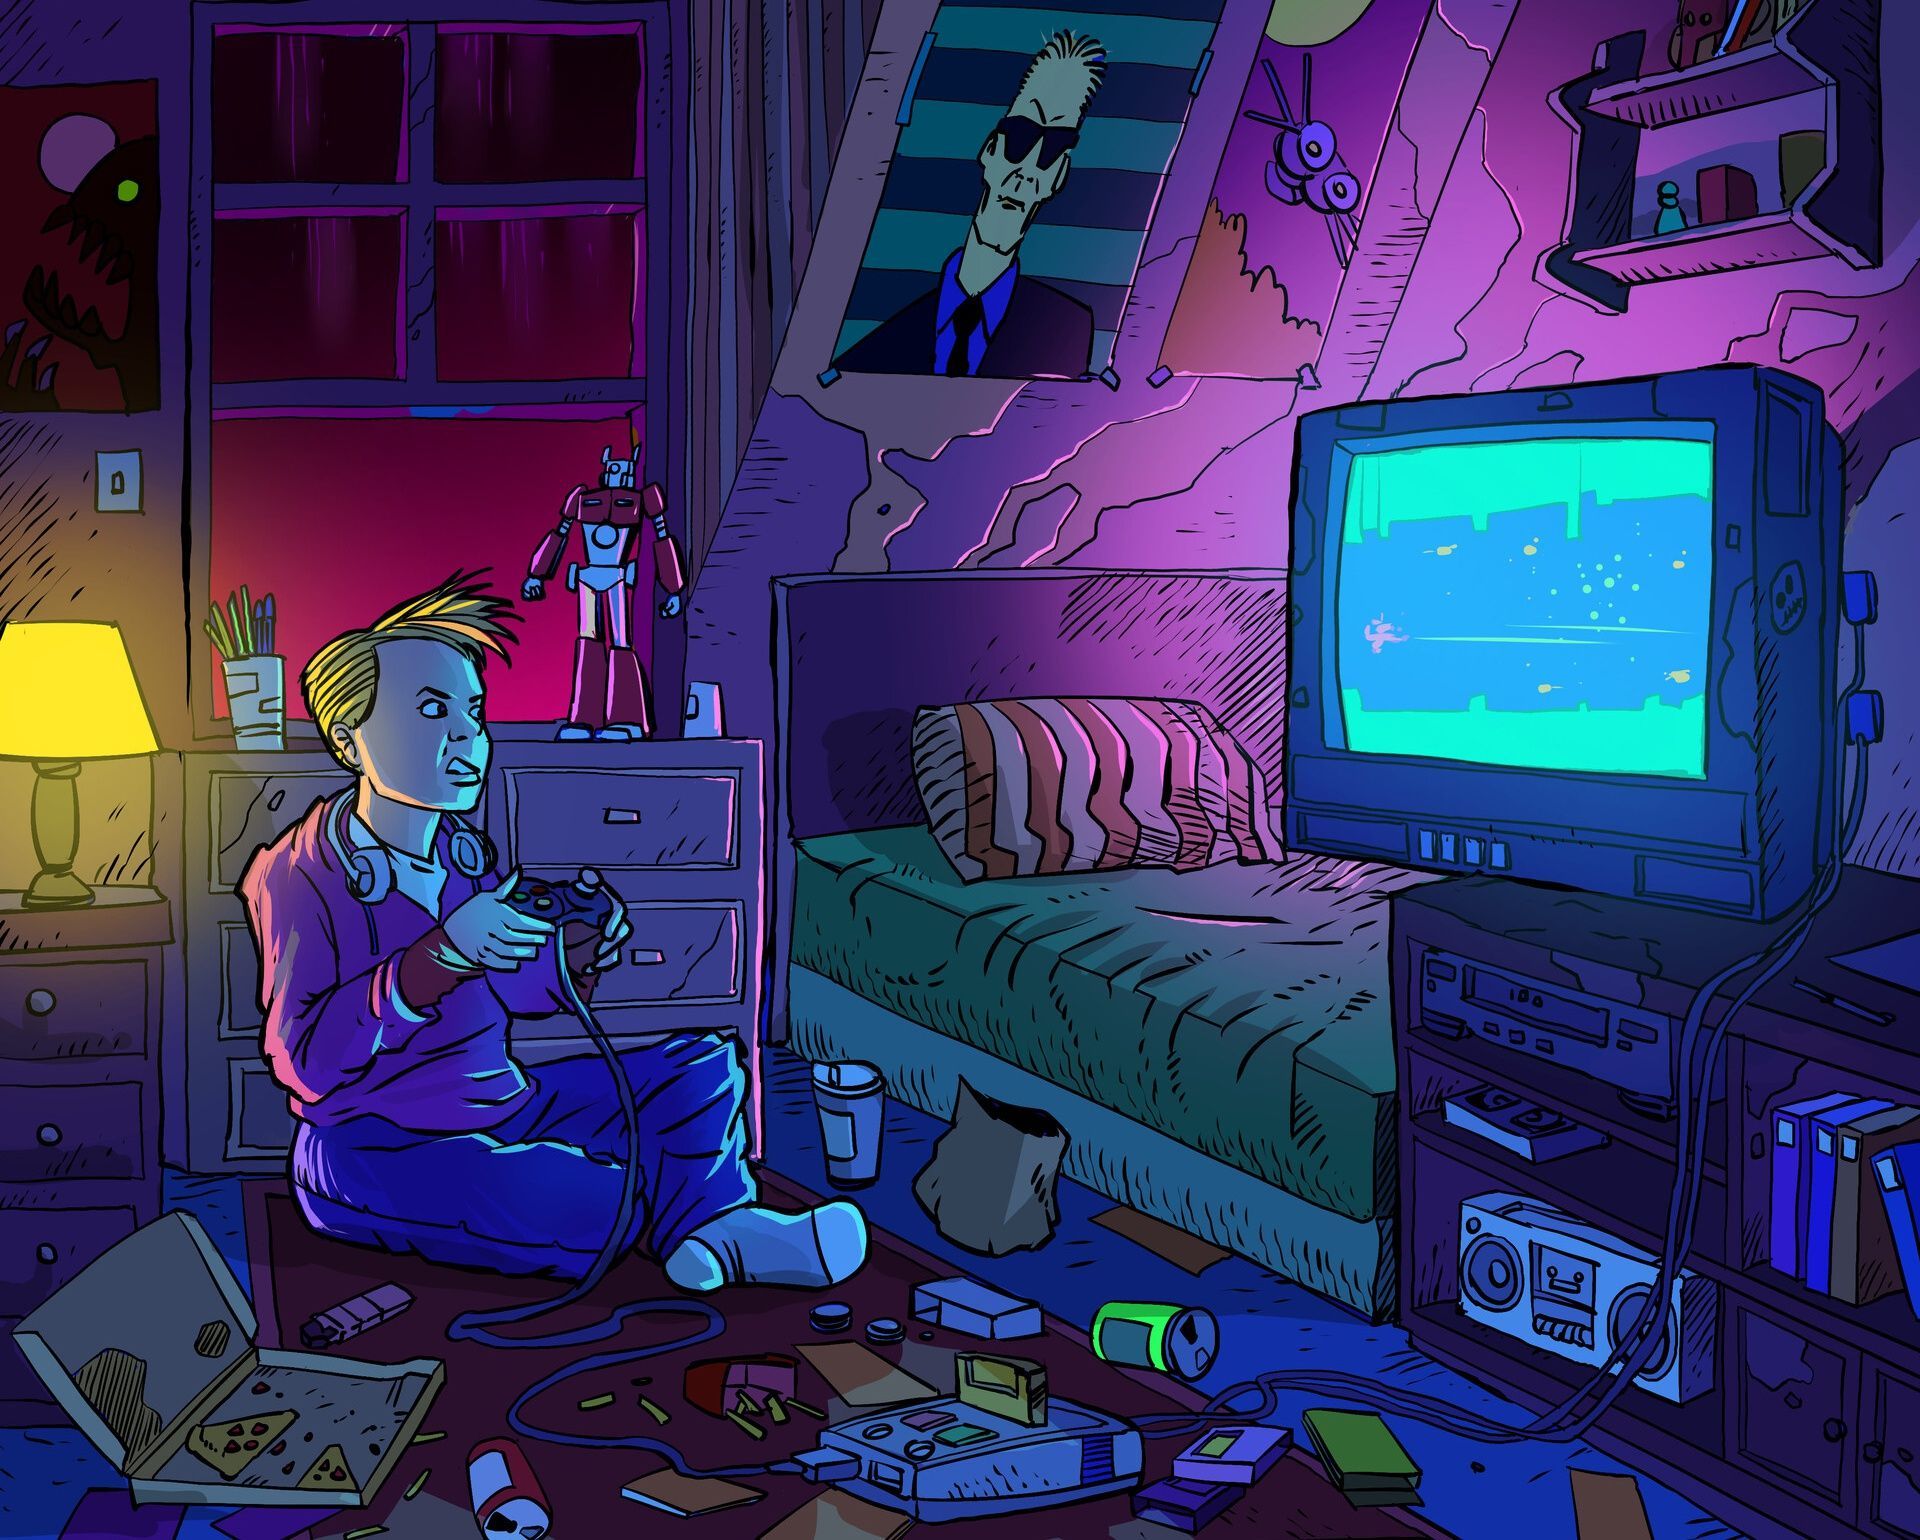 Download wallpaper The game, Style, Room, Child, Background, Console, Style, Game, Illustration, Child, Room, Childhood, Retrowave, Synthwave, New Retro Wave, Sintav, section art in resolution 1920x1540